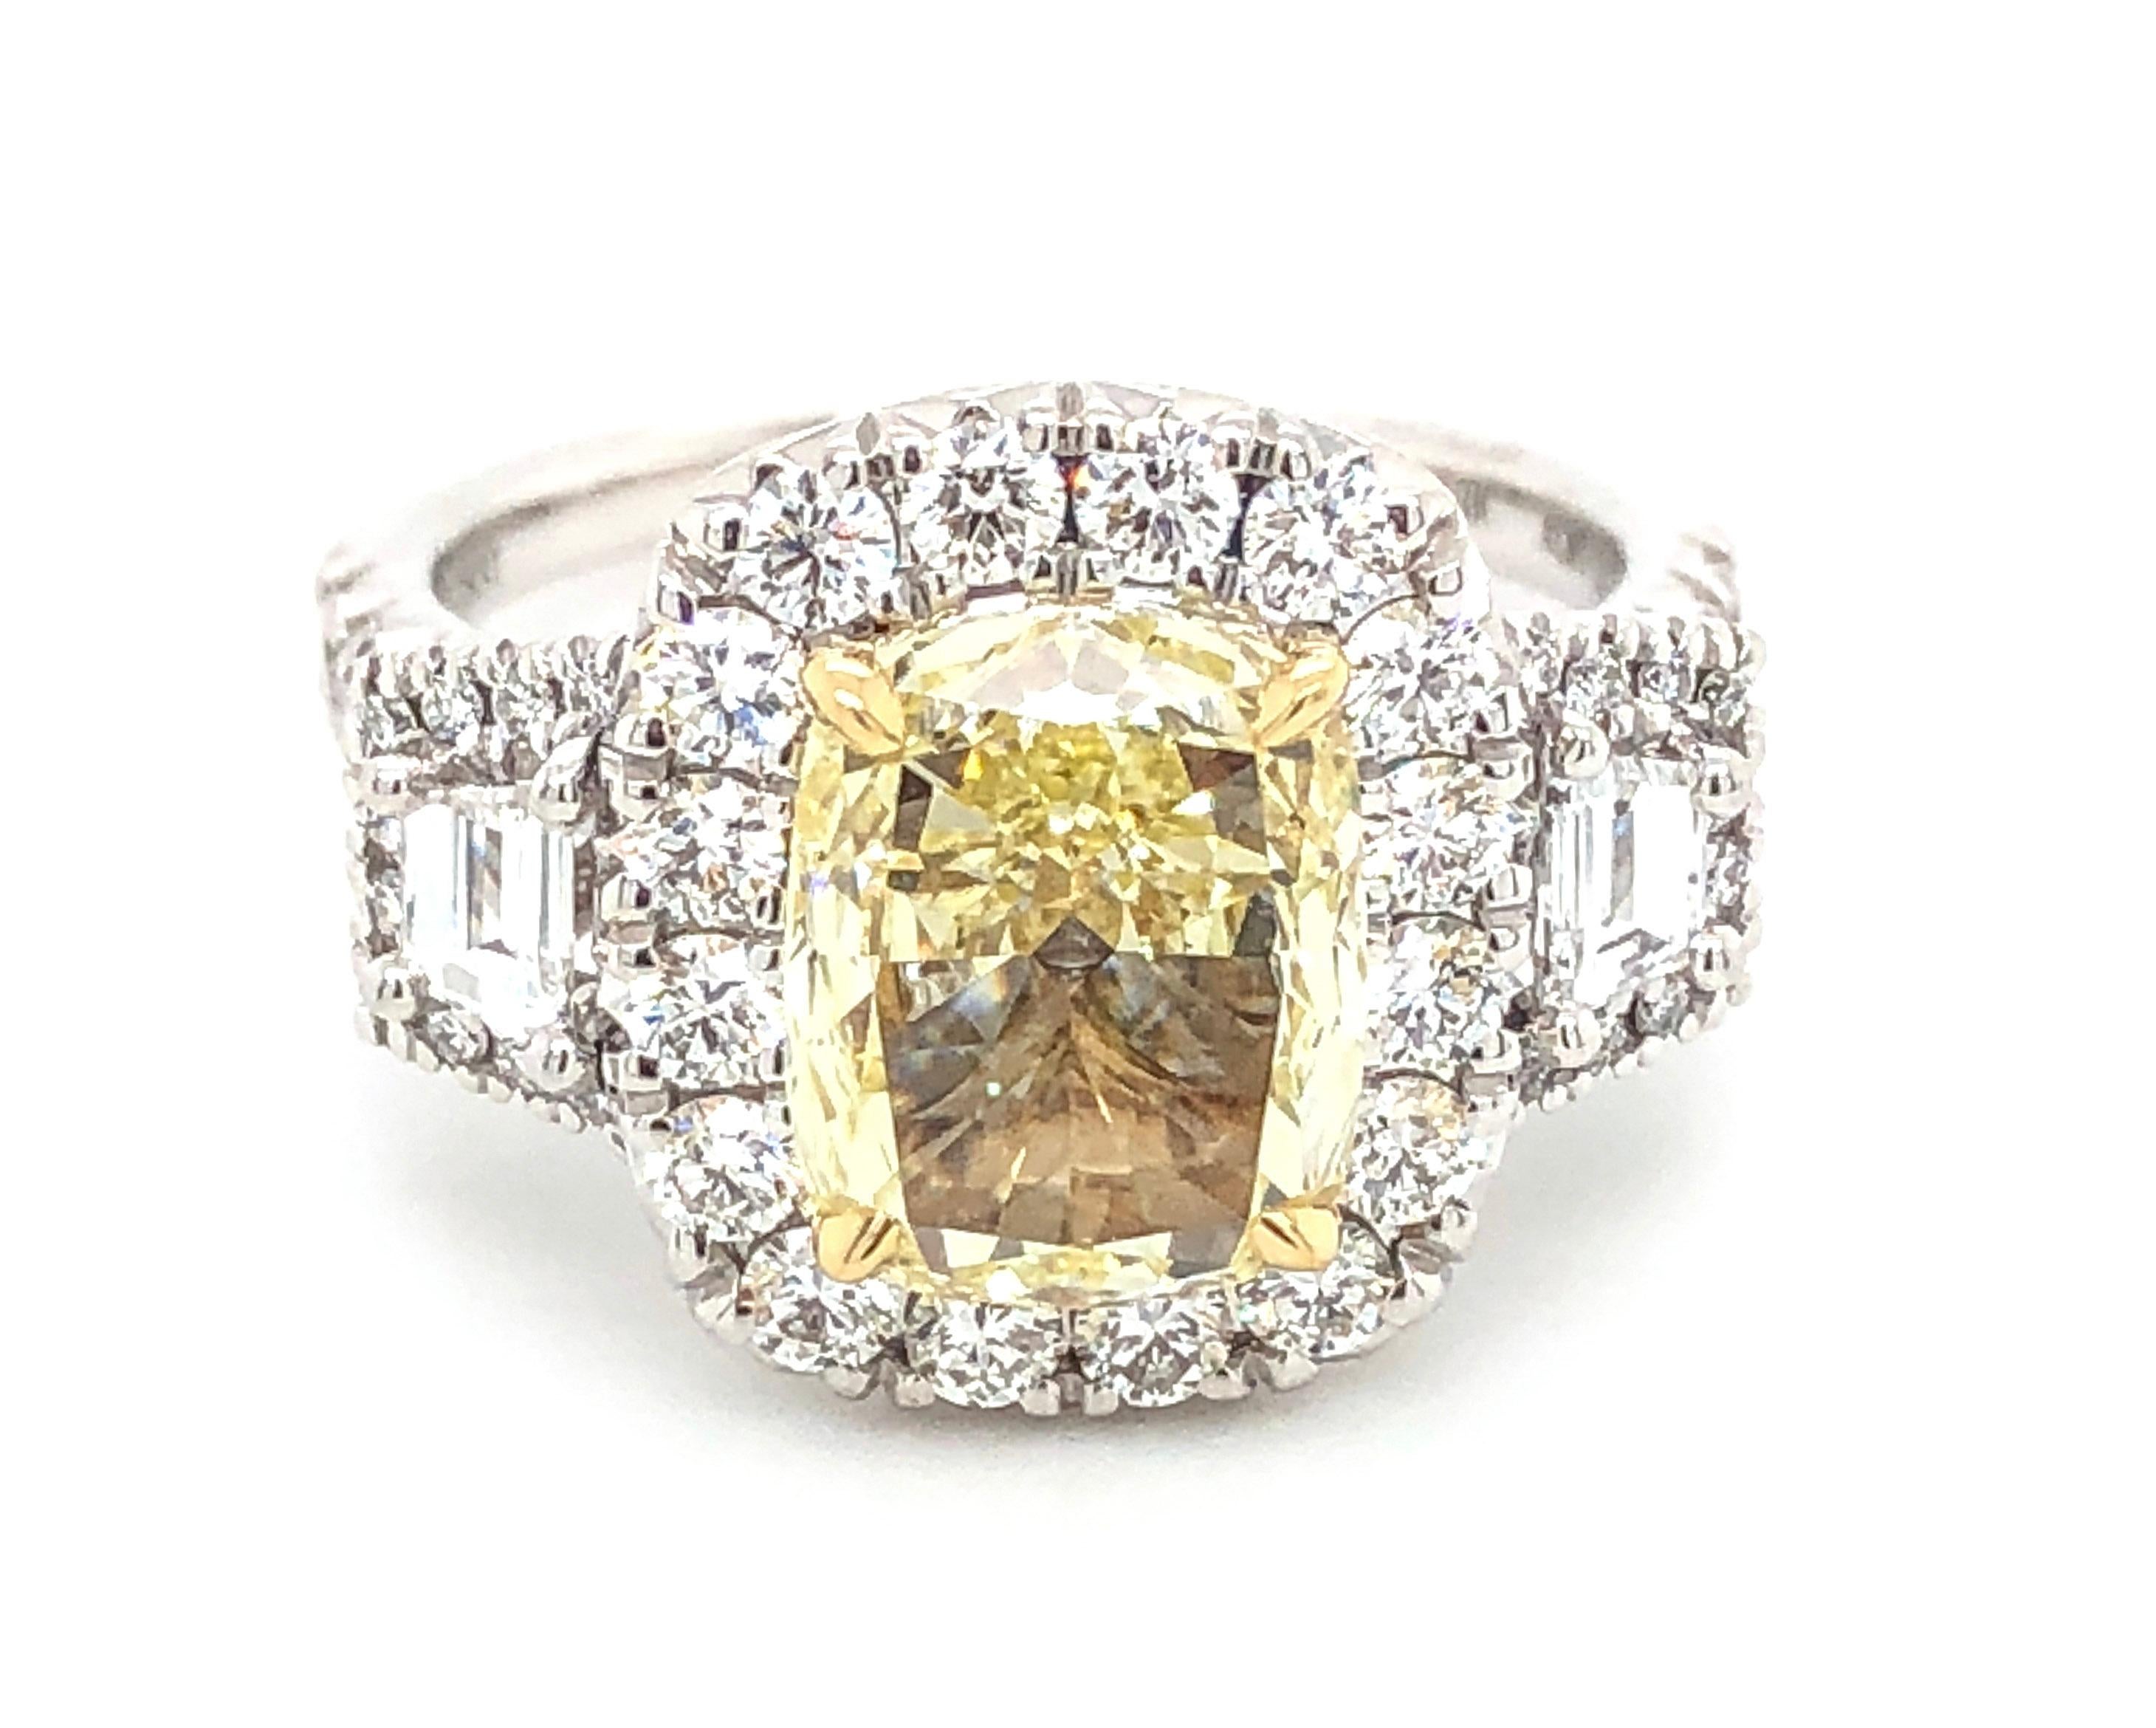 You will adore our Cushion Cut Three Stone Canary Fancy Yellow Center Diamond Ring because of its fantastic sparkle and shine! Even more, sparkle is added by pave set of round diamonds around each diamond. With a total 3.31ct t.w. of sparkle we